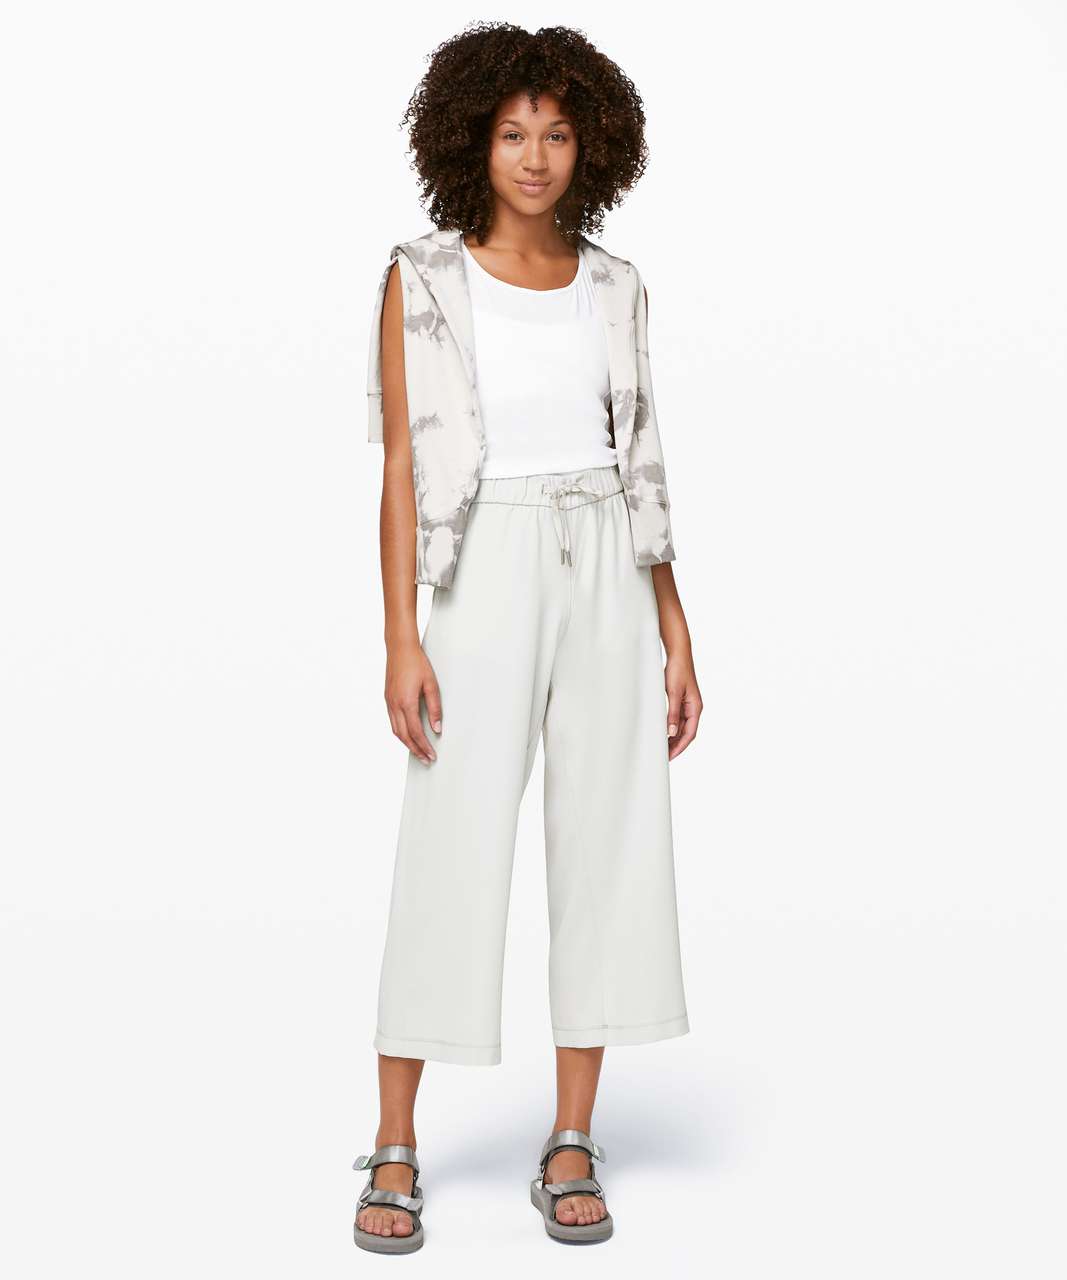 Lululemon On the Fly Wide-Leg 7/8 Pant *Woven - Silverstone